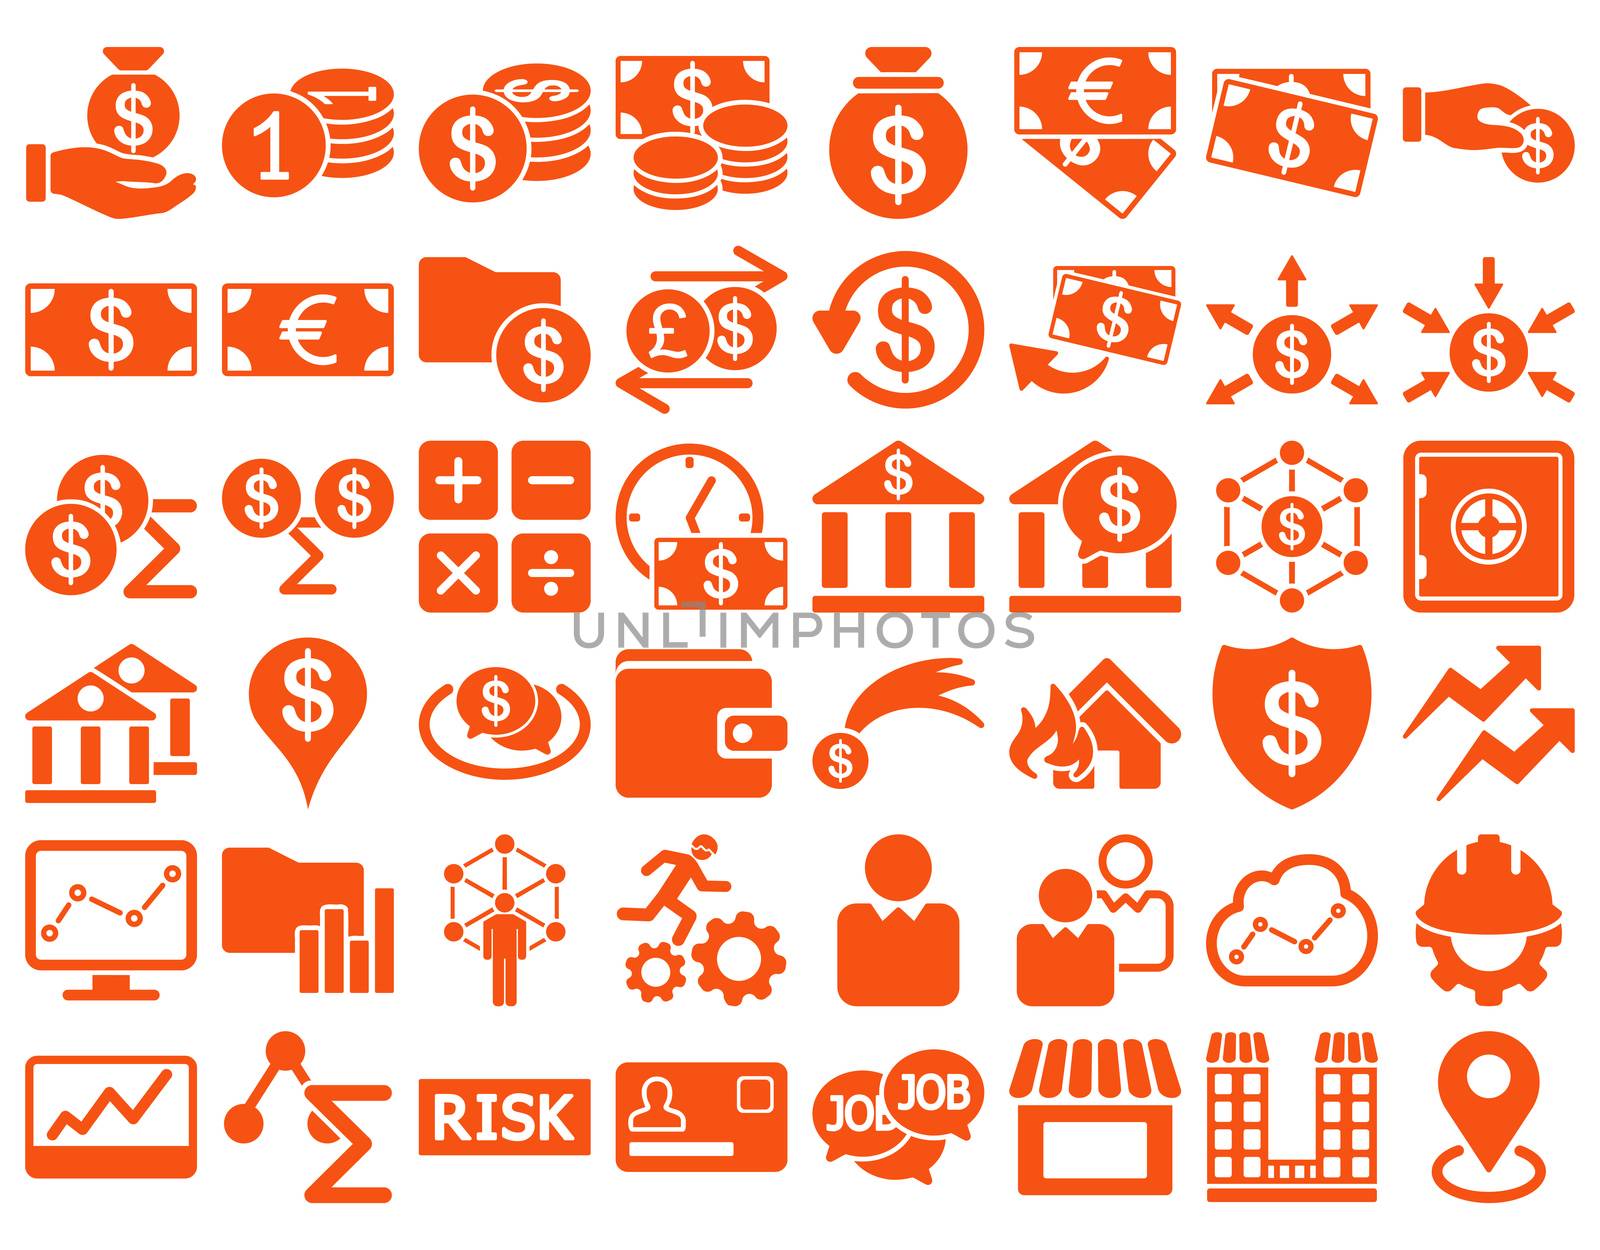 Business Icon Set. These flat icons use orange color. Raster images are isolated on a white background.